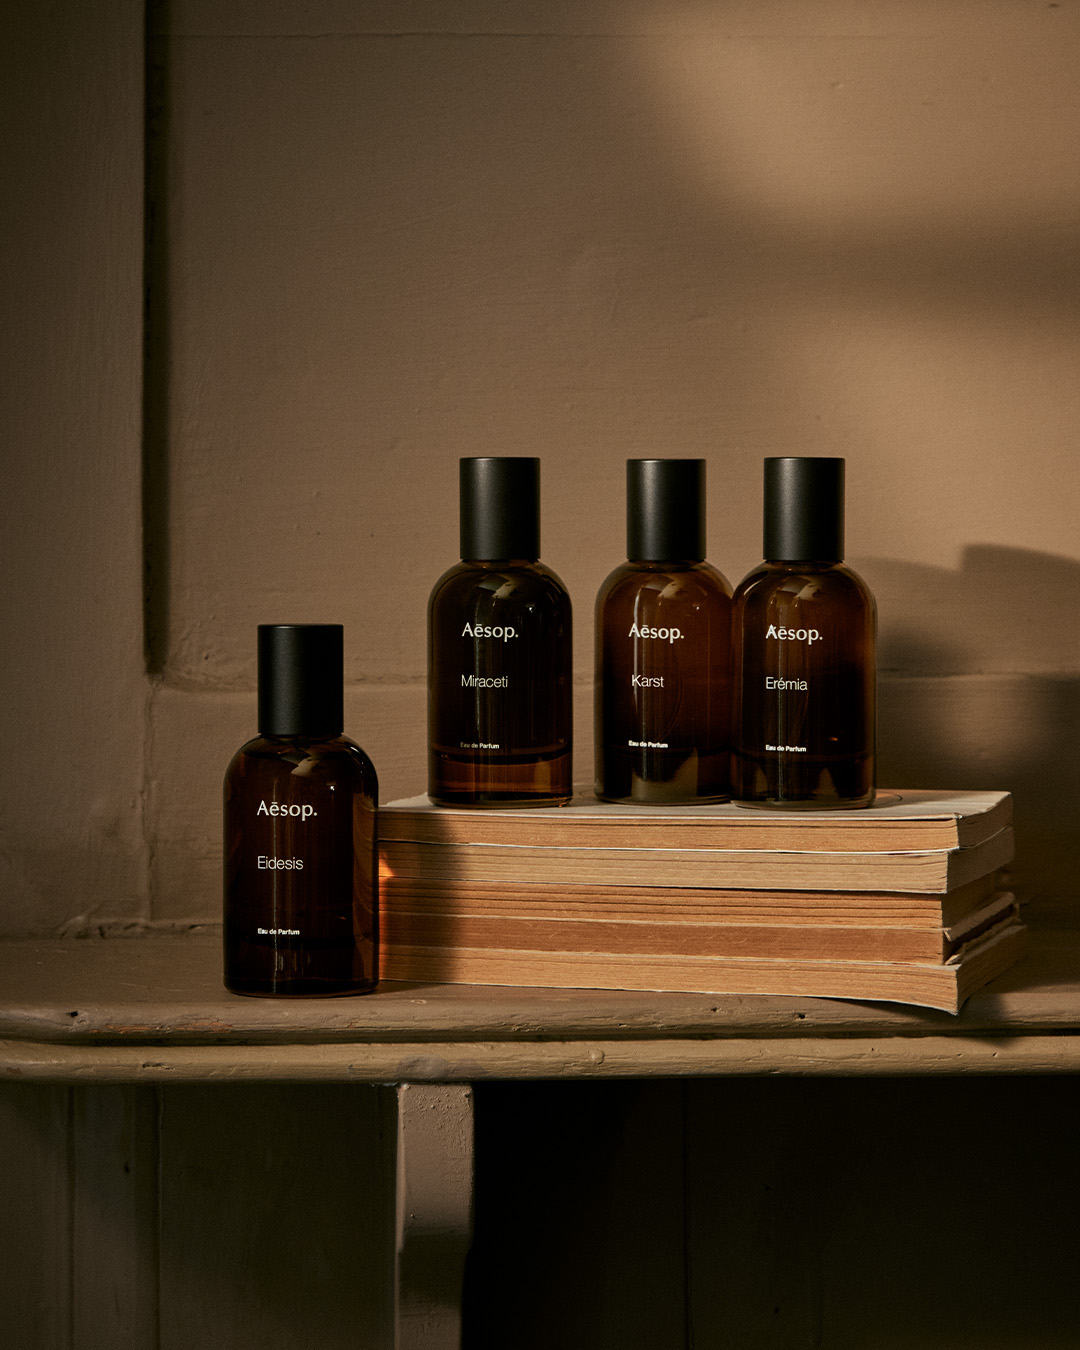 Aesop Scents Cologne - Valentine's Day gifts for the athlete you love 